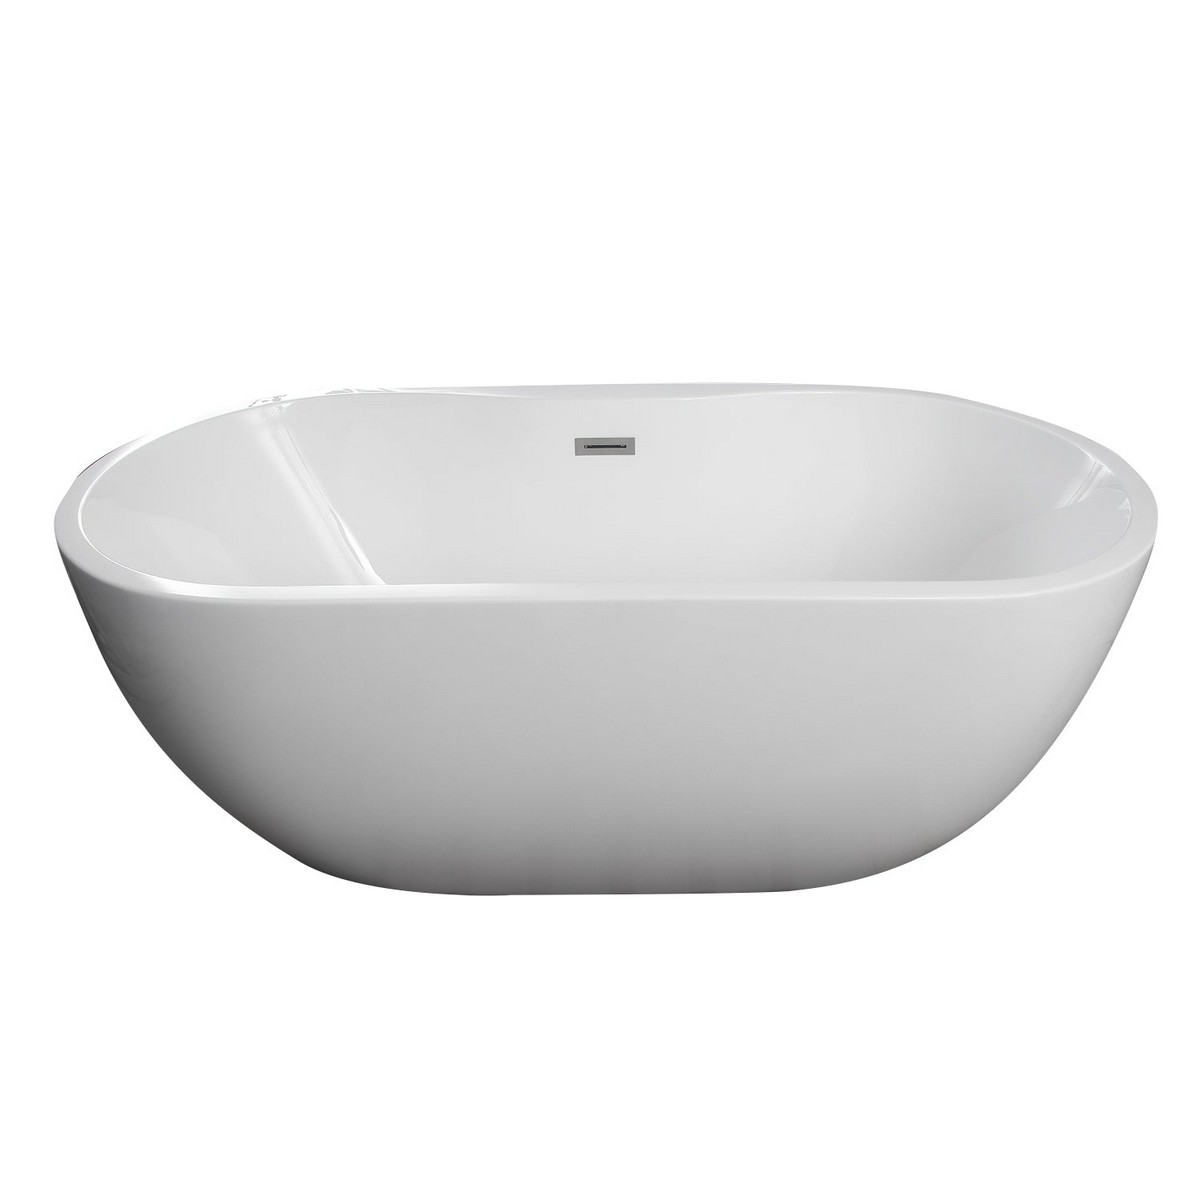 BARCLAY ATOVN56BIG PAN 55 1/2 INCH ACRYLIC FREESTANDING OVAL SOAKING BATHTUB IN WHITE WITH INTEGRAL DRAIN AND OVERFLOW AND TAP DECK